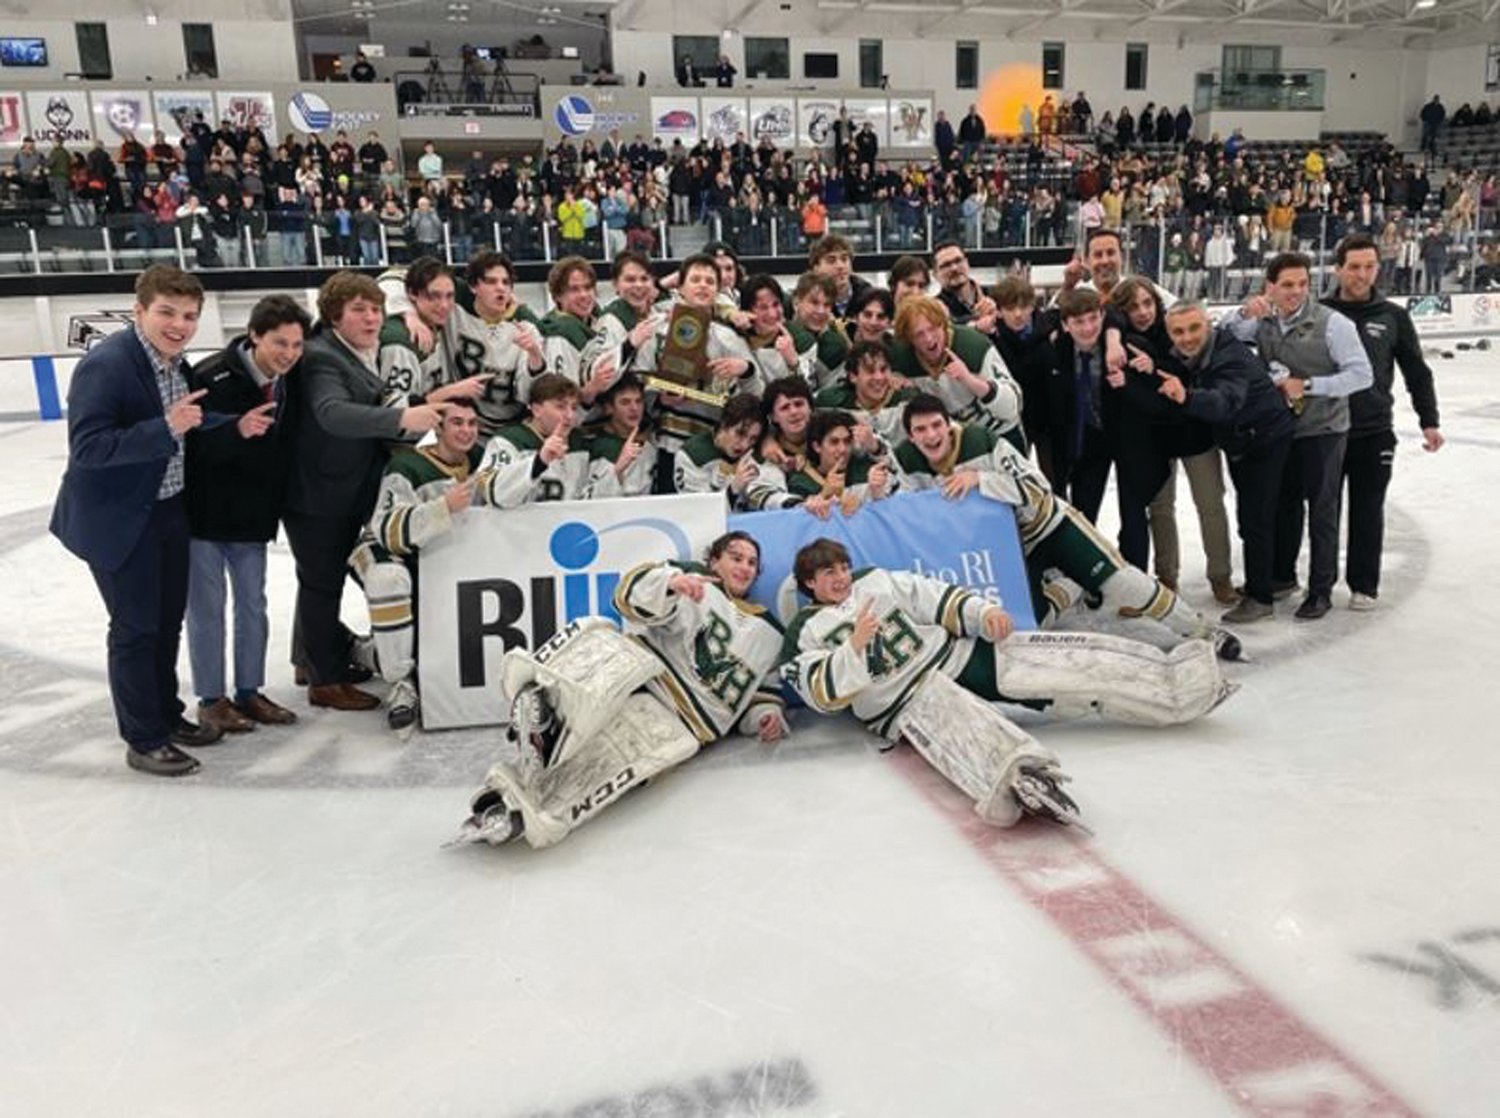 CHAMPS AGAIN: The Hendricken hockey team after winning the state championship. (Photos by Alex Sponseller)